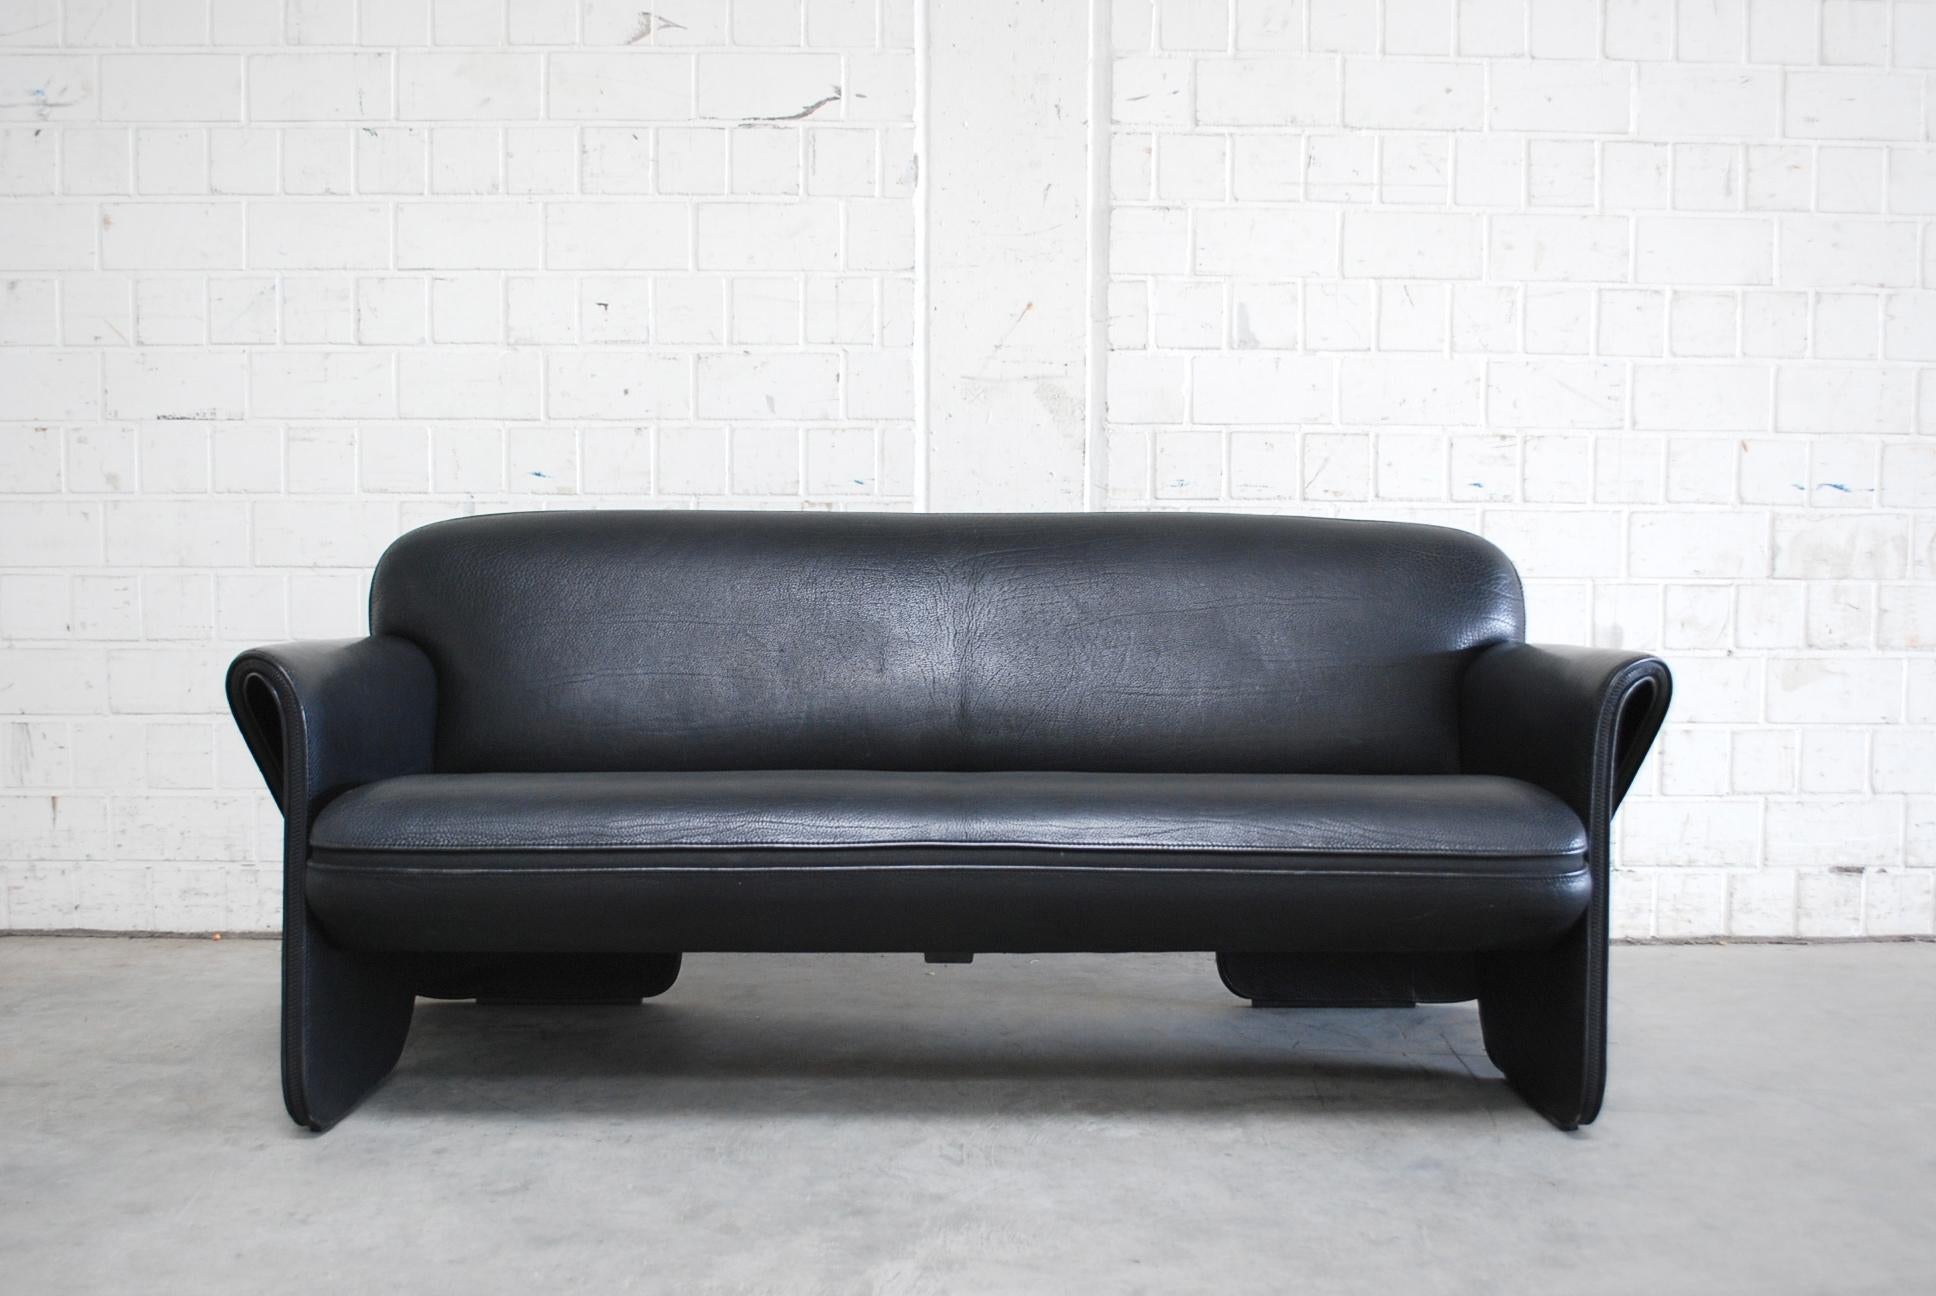 De Sede model Ds 125 neck leather sofa.
Design by German designer Gerd Lange.
3-seater sofa with sculptural curved lines and zip details on the armrests.
It’s a thick neck leather in light black color.
It’s not the darkest black.
The sofa is in